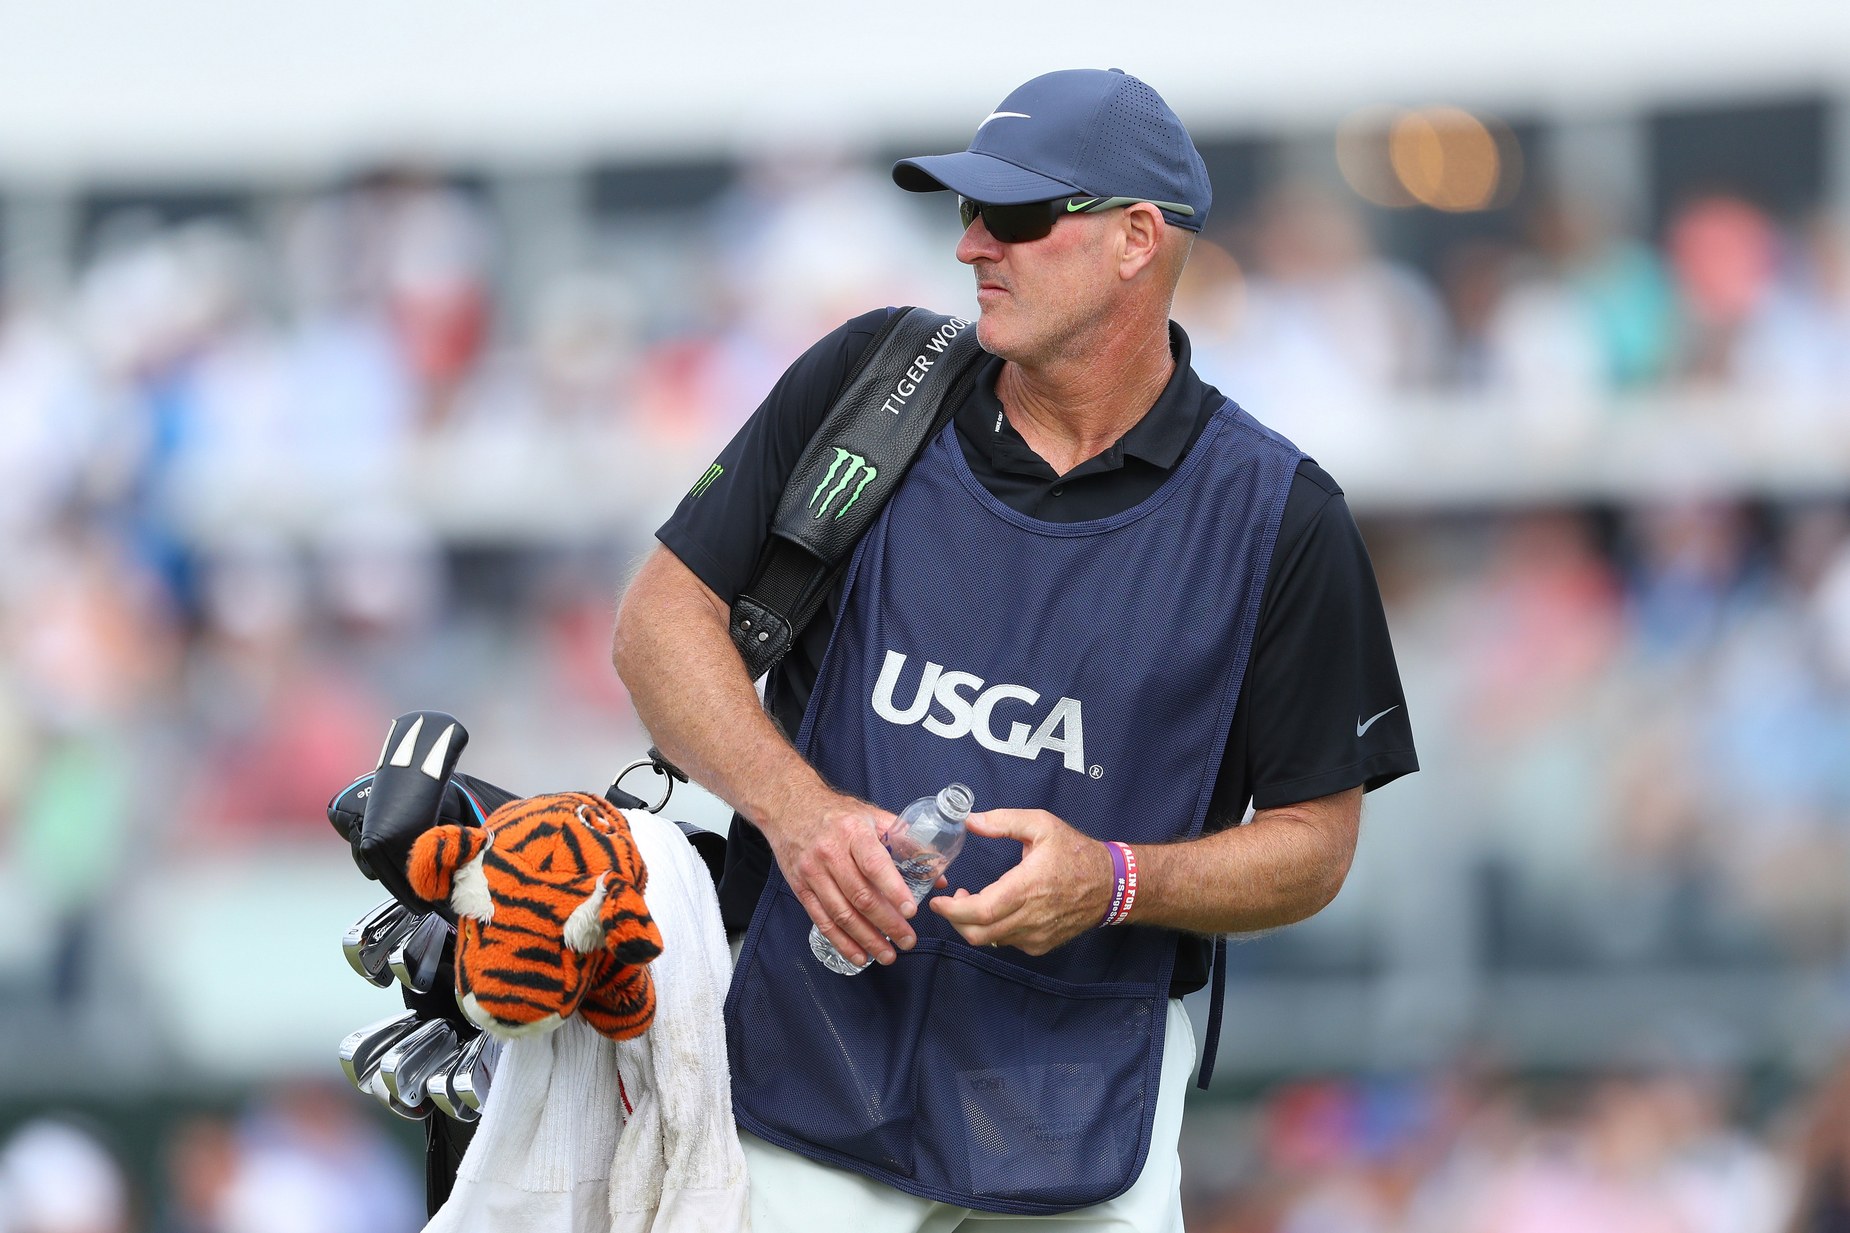 Joe LaCava's Caddying Partner: Who Is He Currently Working With?